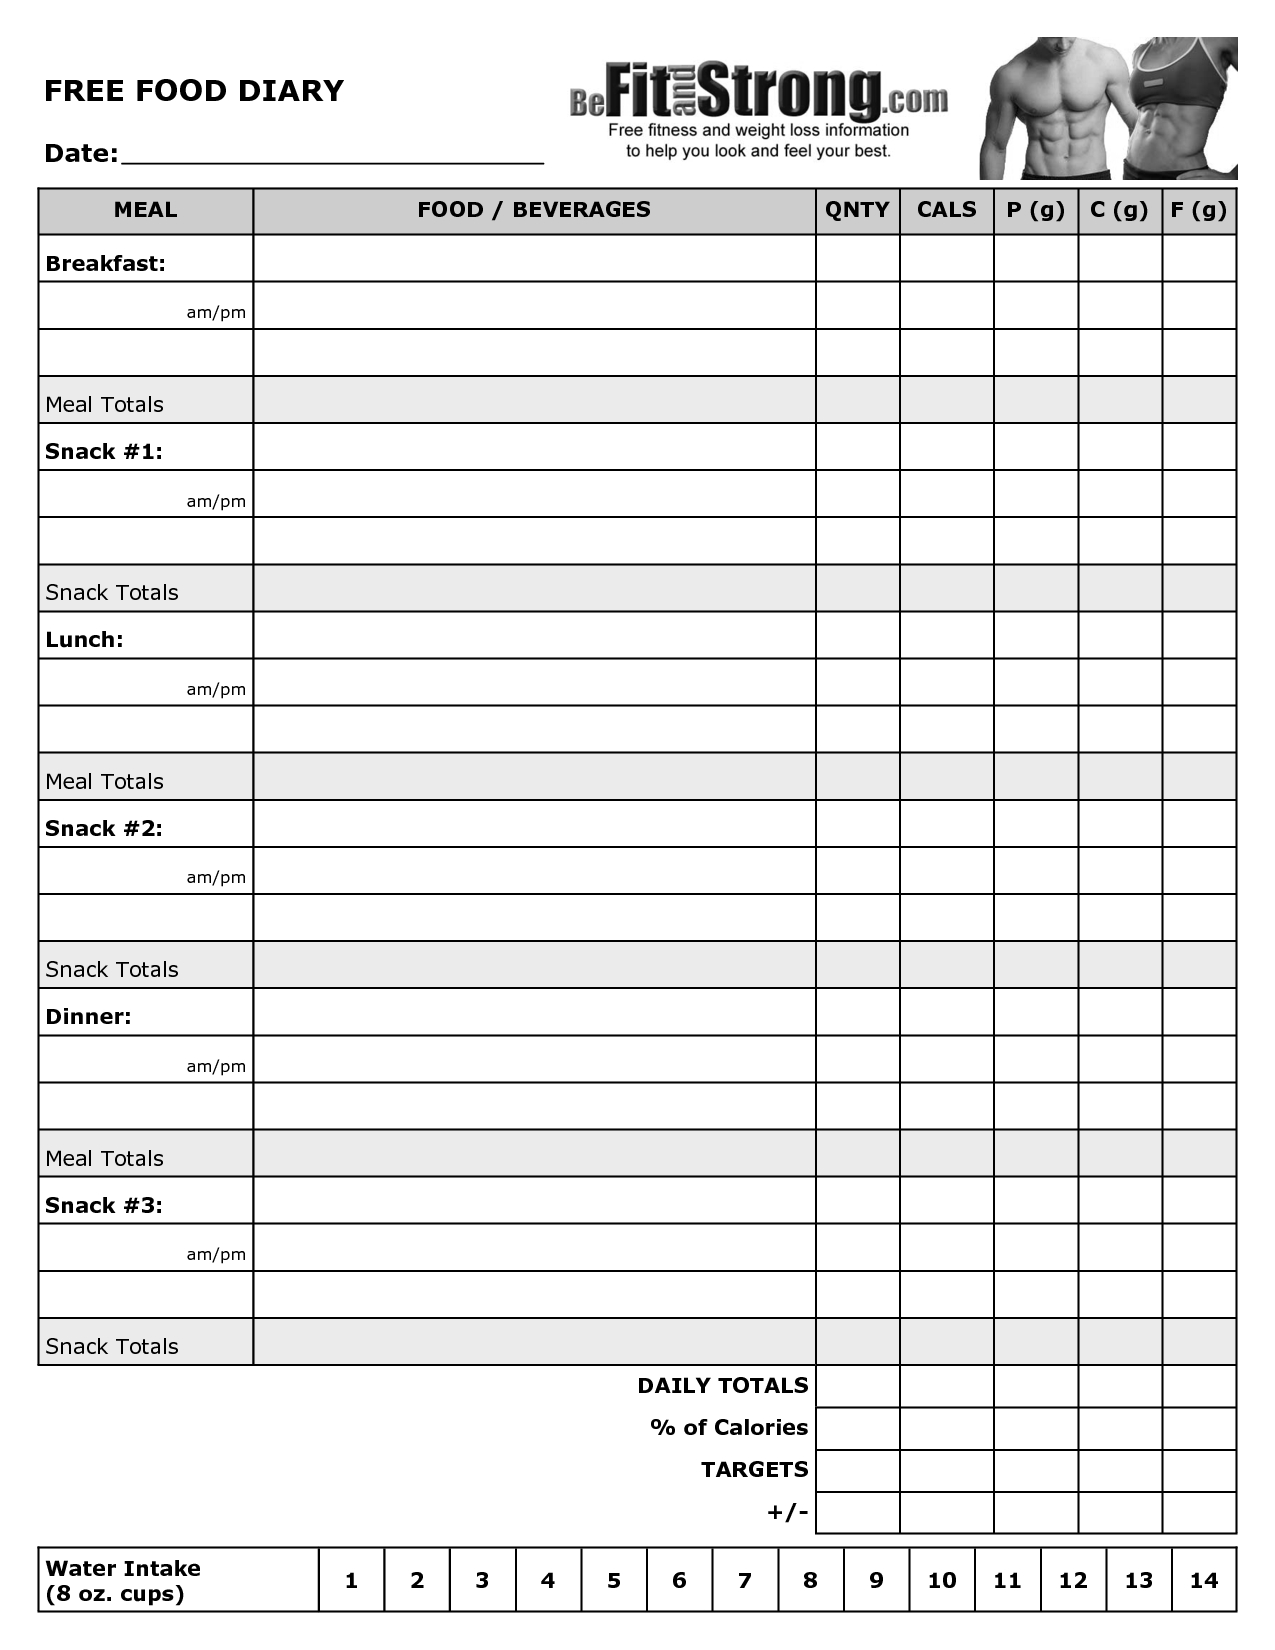 Free Printable Food Diary Template | Health, Fitness &amp;amp; Weight Loss - Diet Logs Printable Free